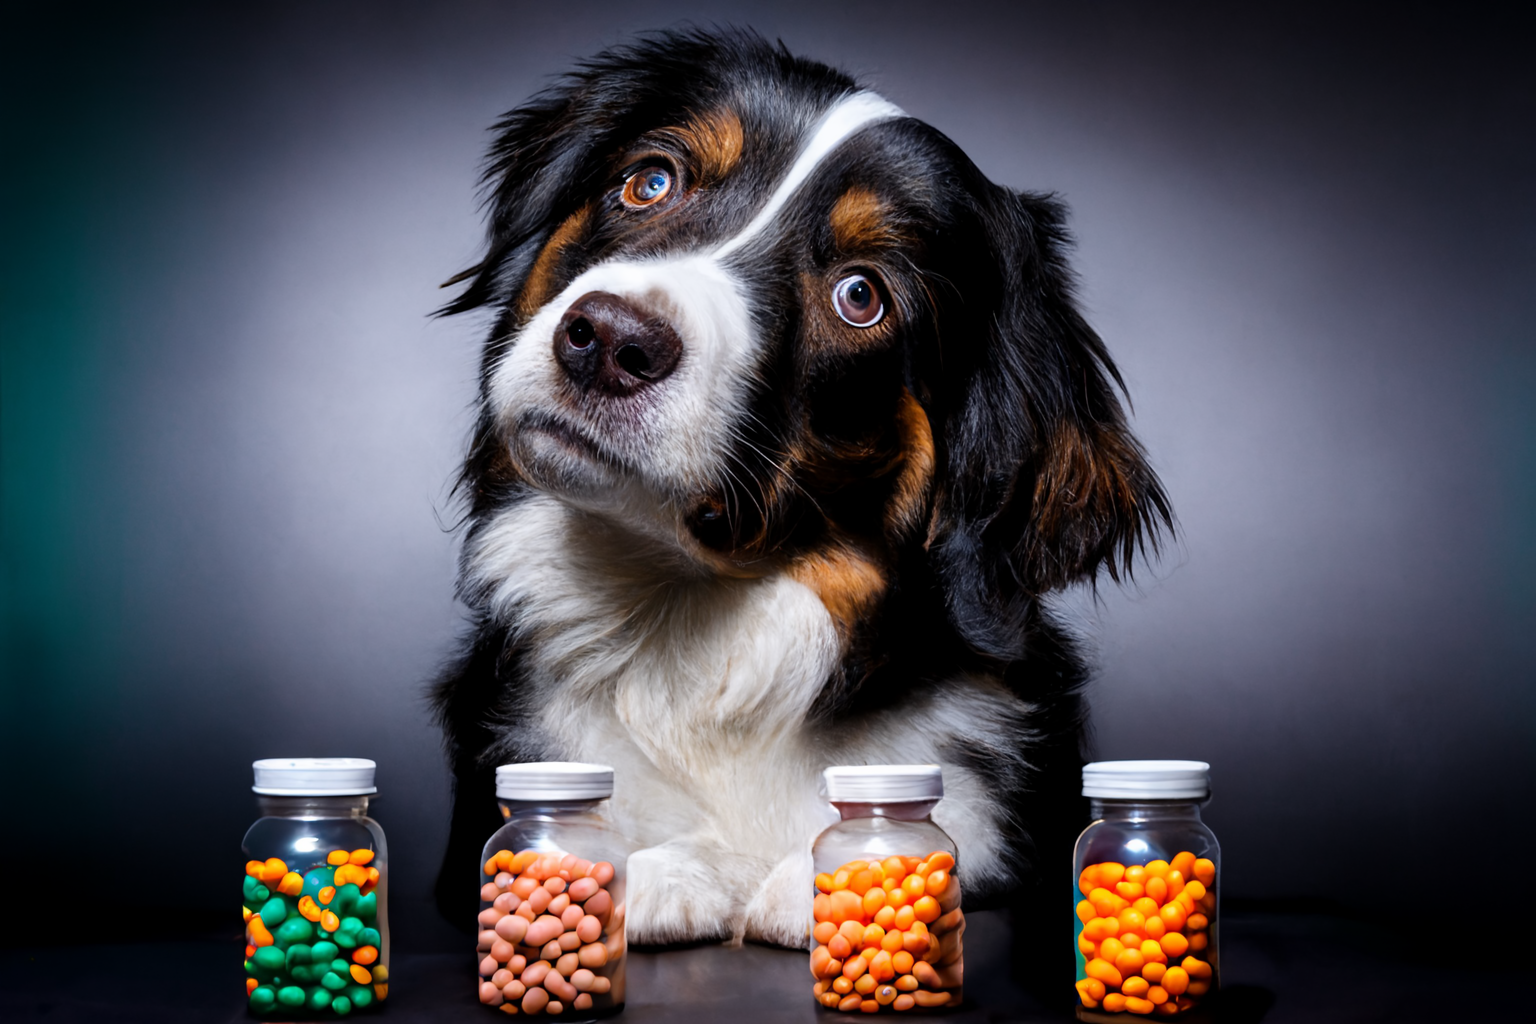 Which Medication Should be Used for Dog Aggression?